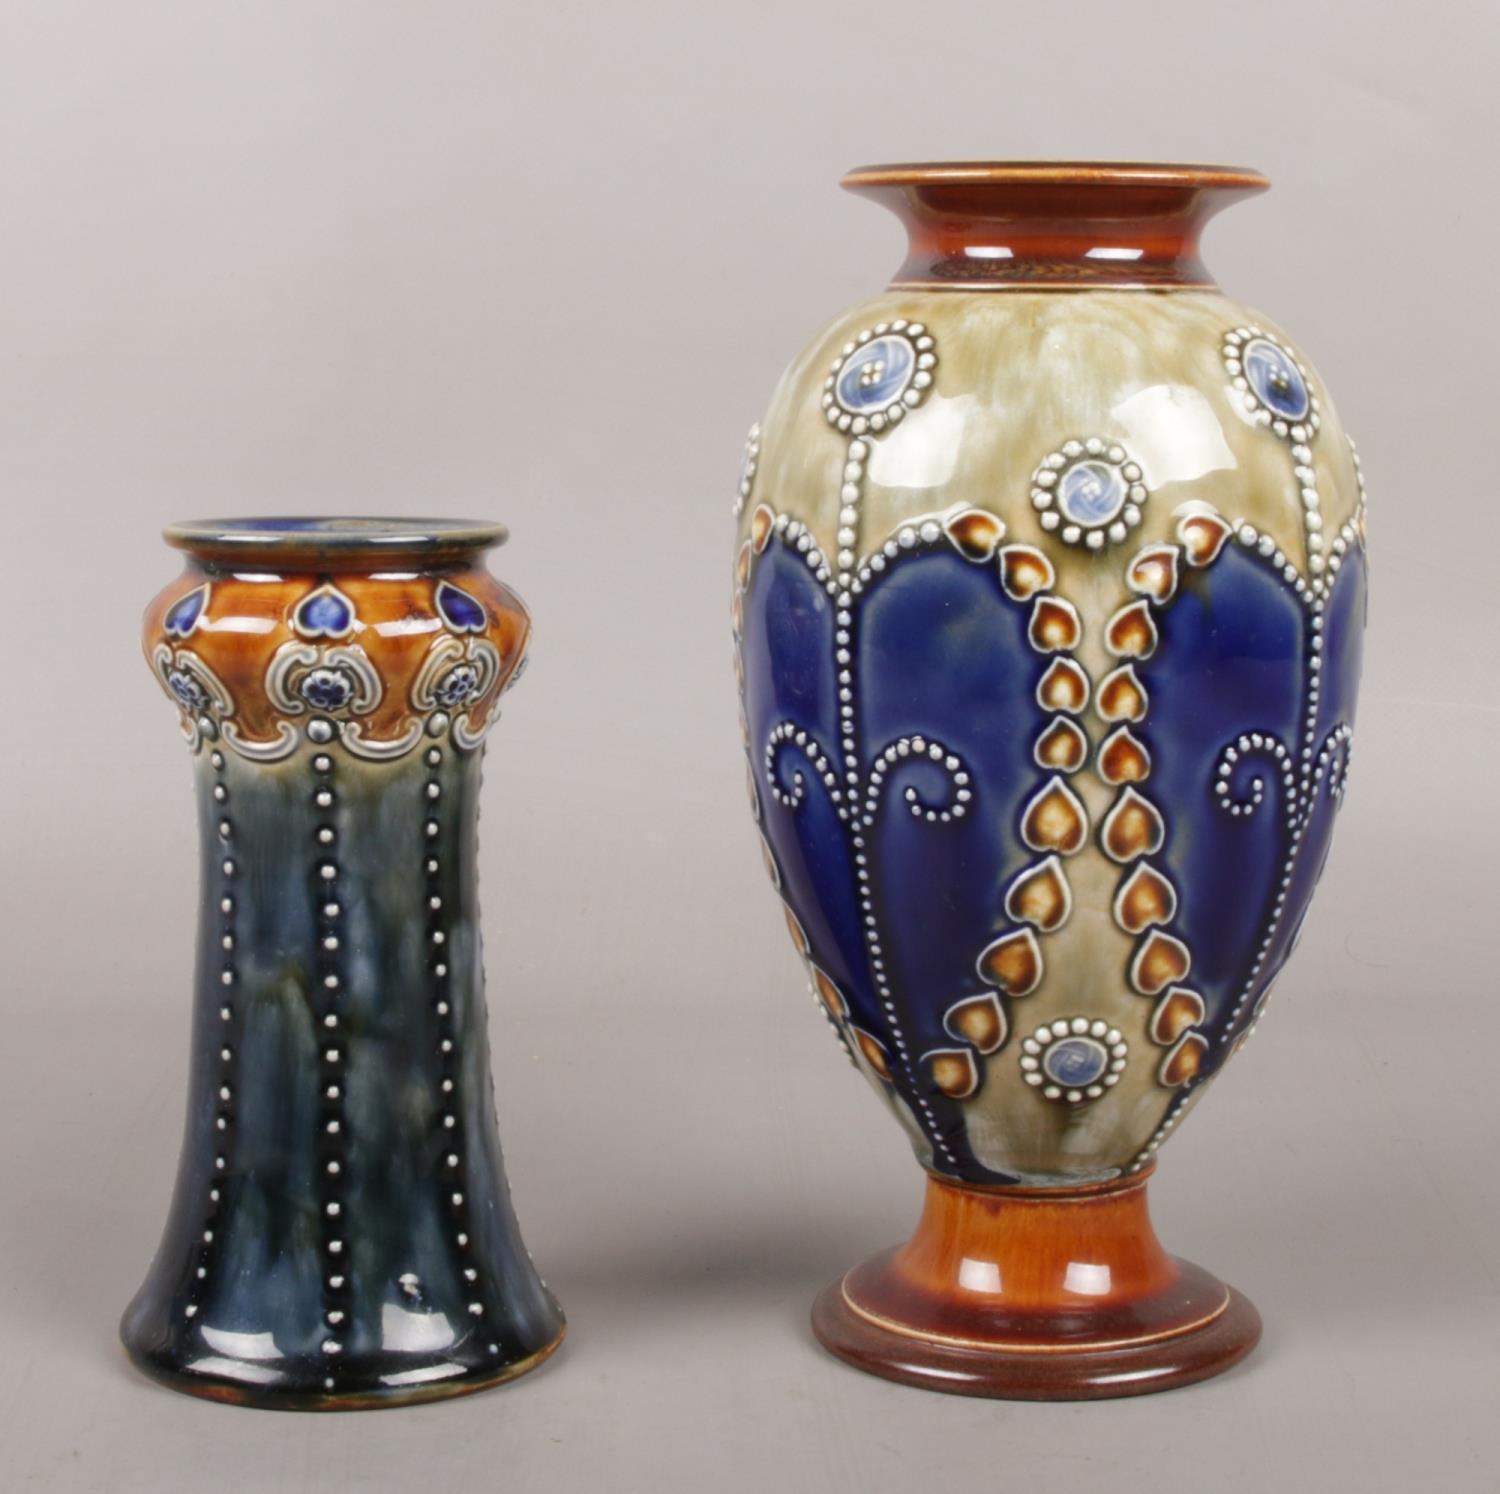 Two Royal Doulton stoneware vases, stamped 3309 and 6629 to the bases. Tallest example: 19.5cm.